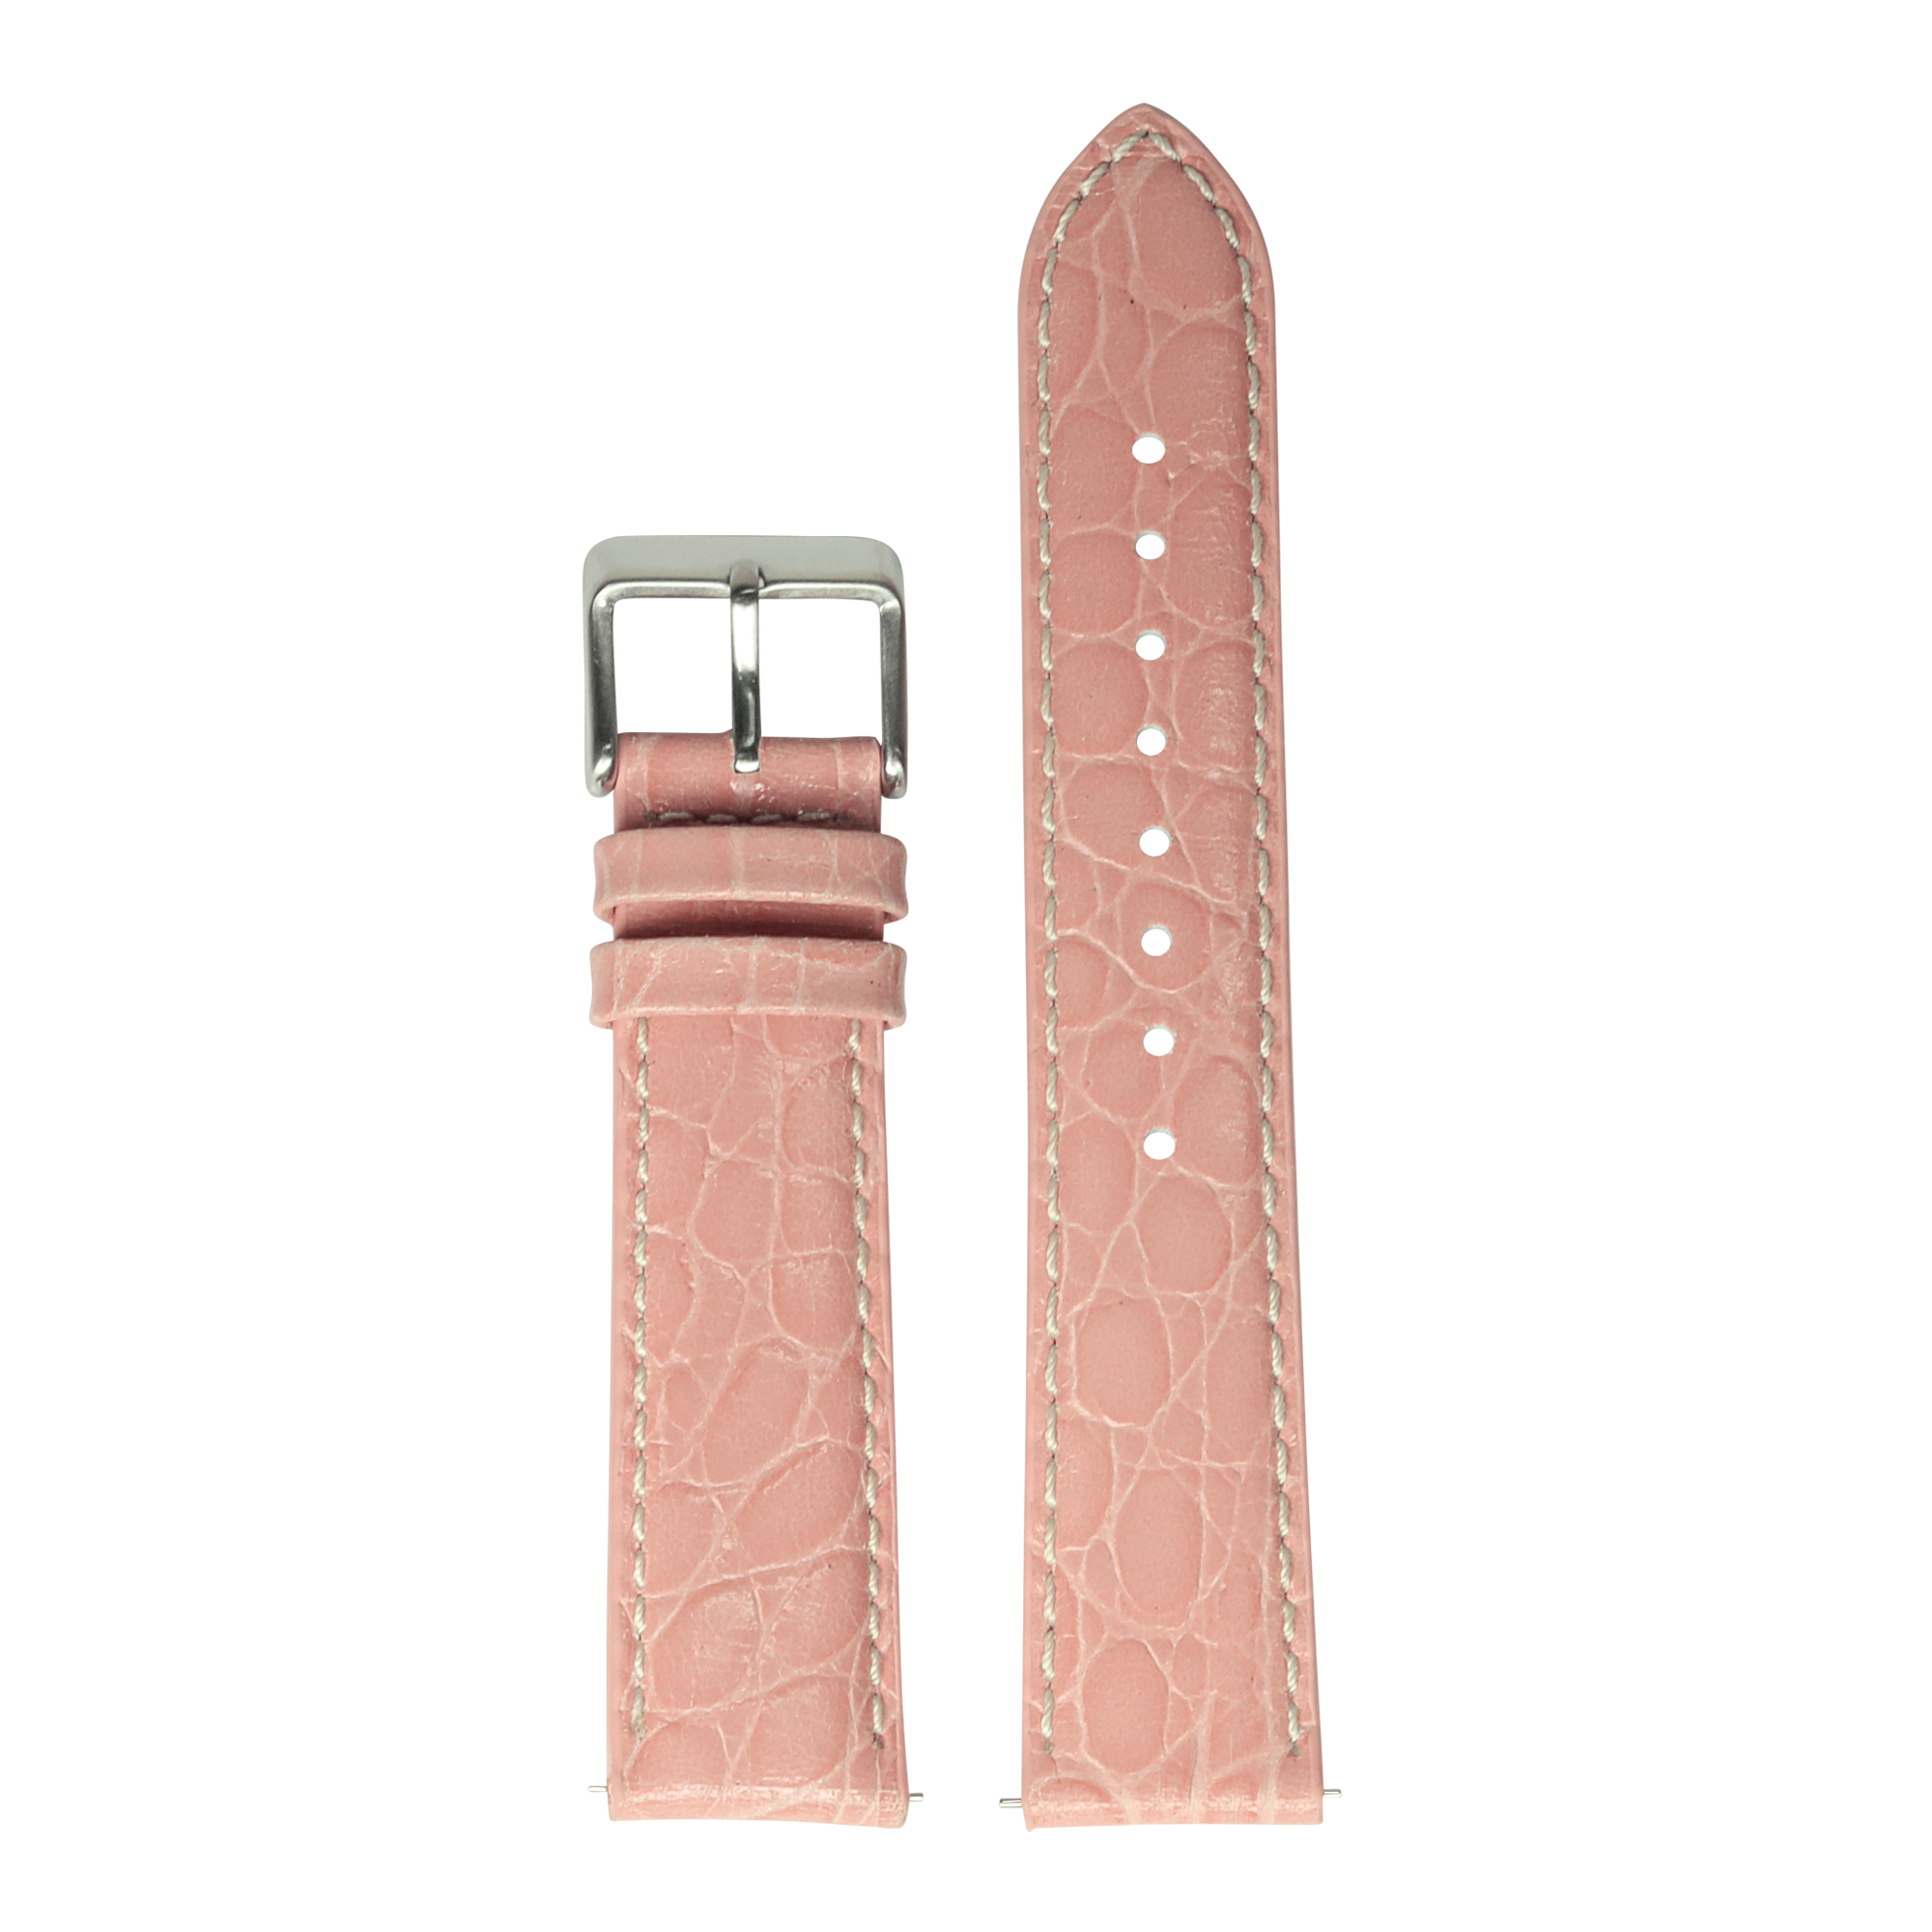 [QuickFit] Alligator Leather - Pink with White Stitching 20mm